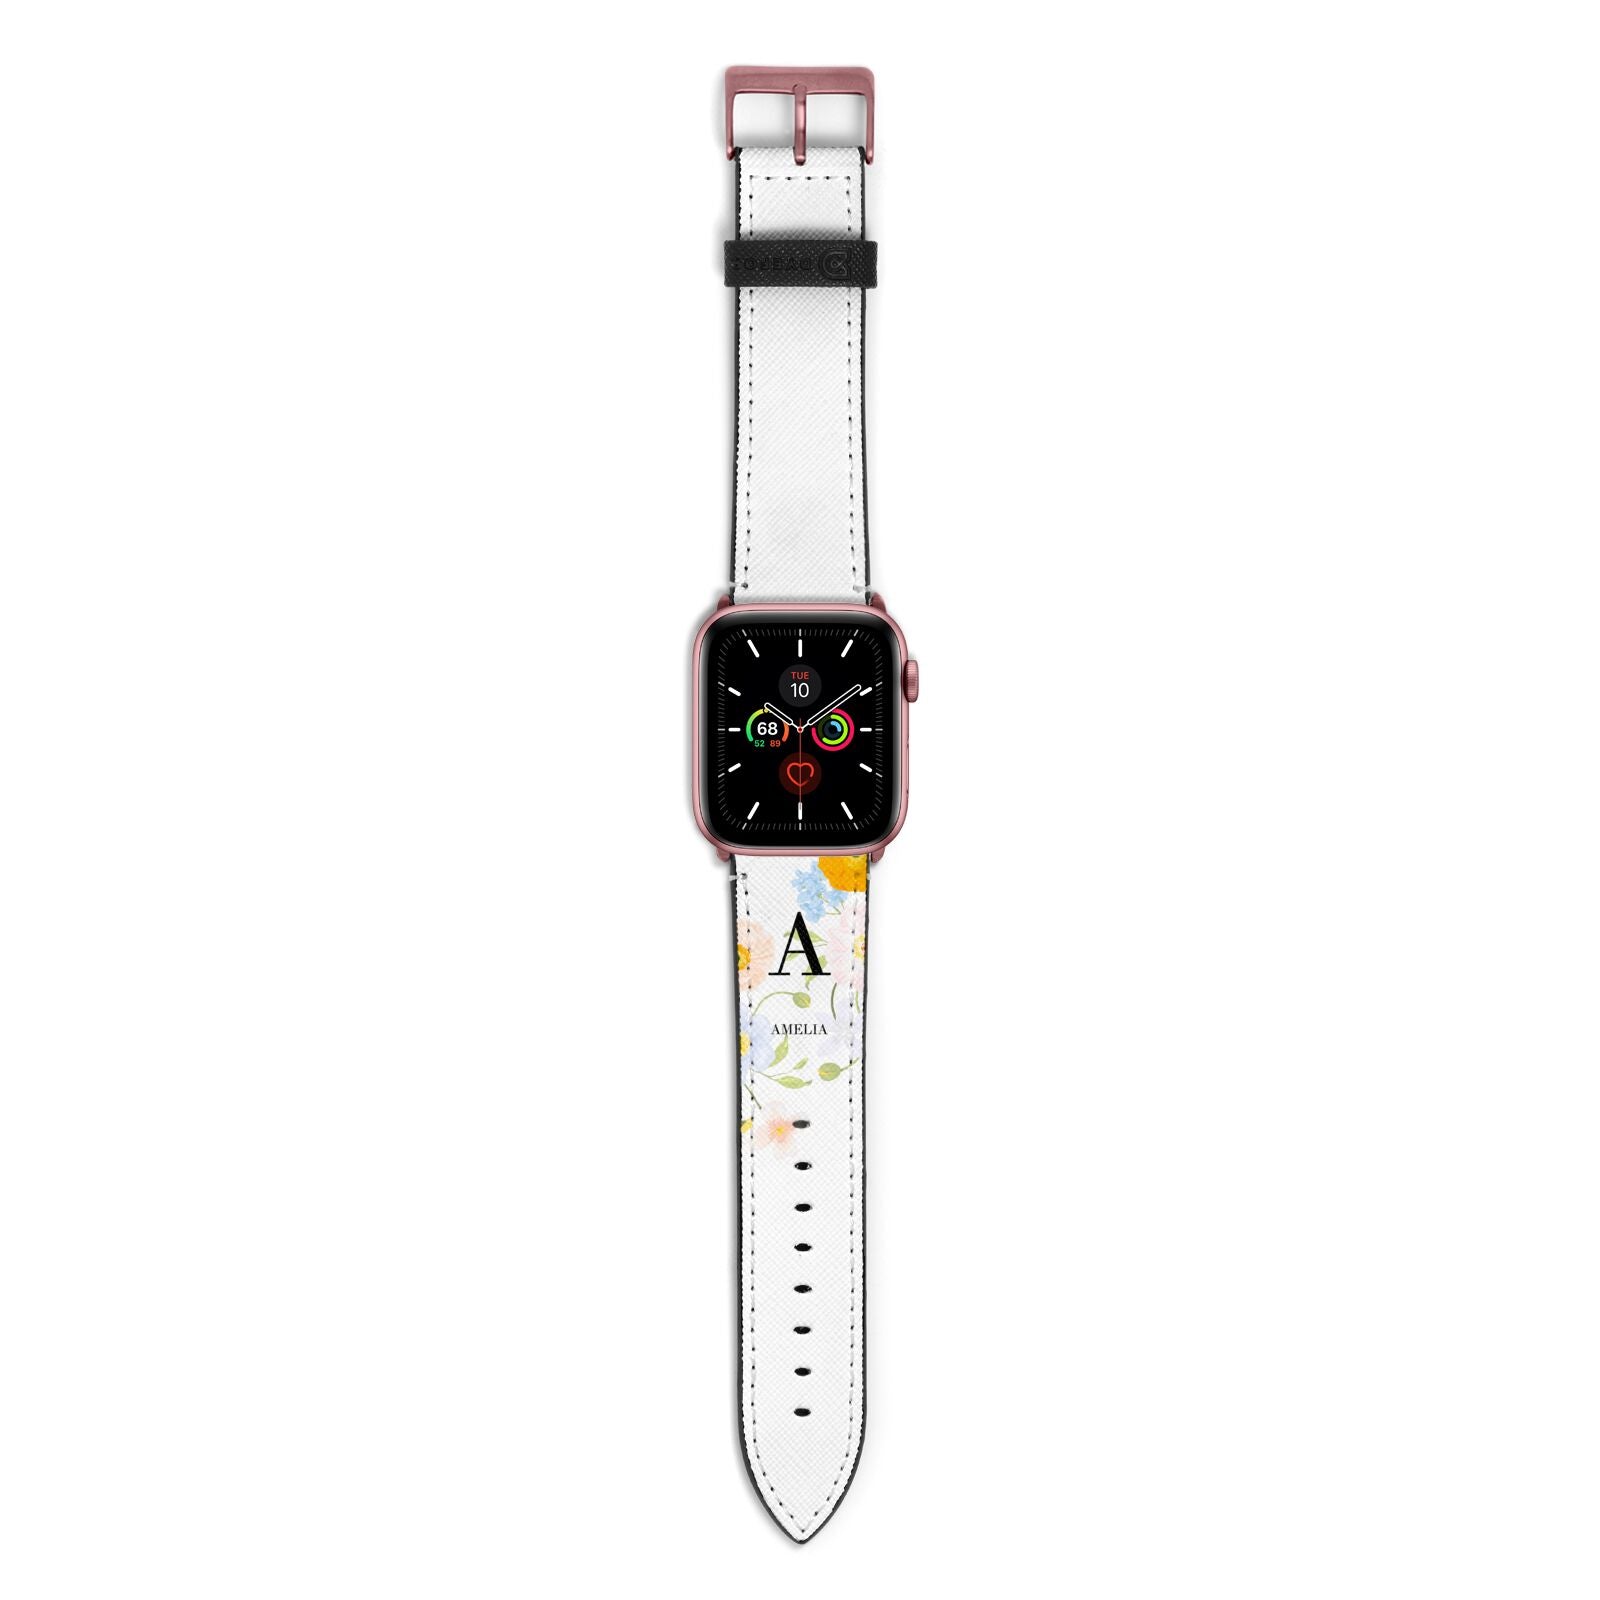 Customised Floral Apple Watch Strap with Rose Gold Hardware